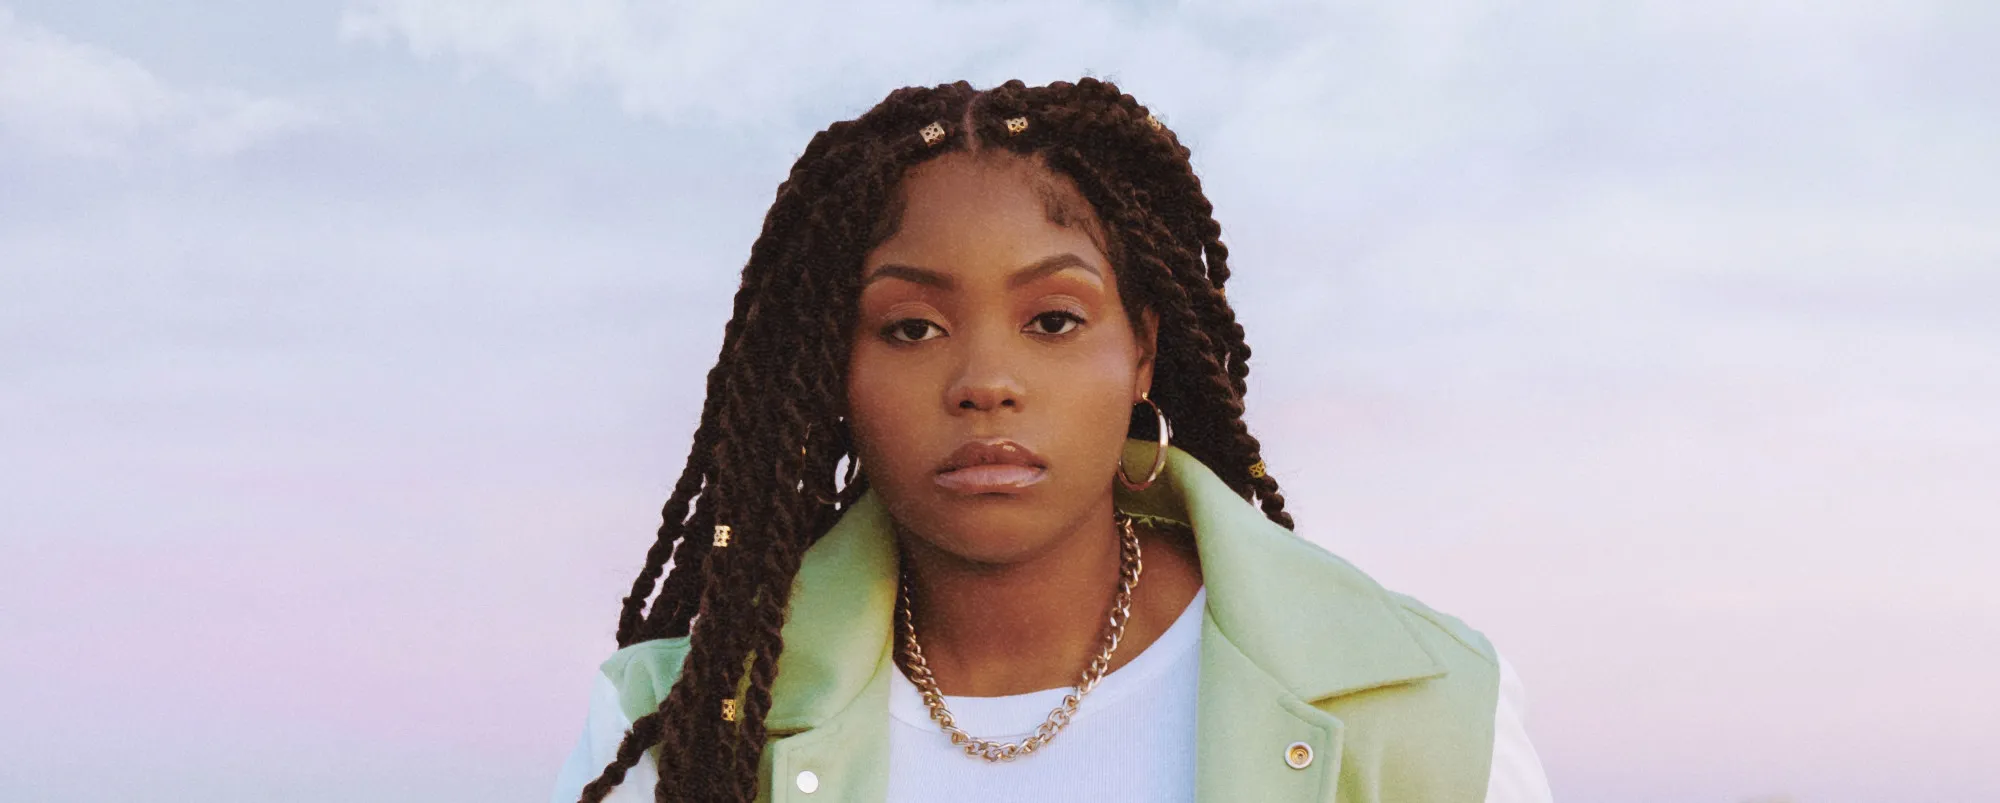 Daily Discovery: Blessing Has a Few Thoughts on Love and “boys like you”